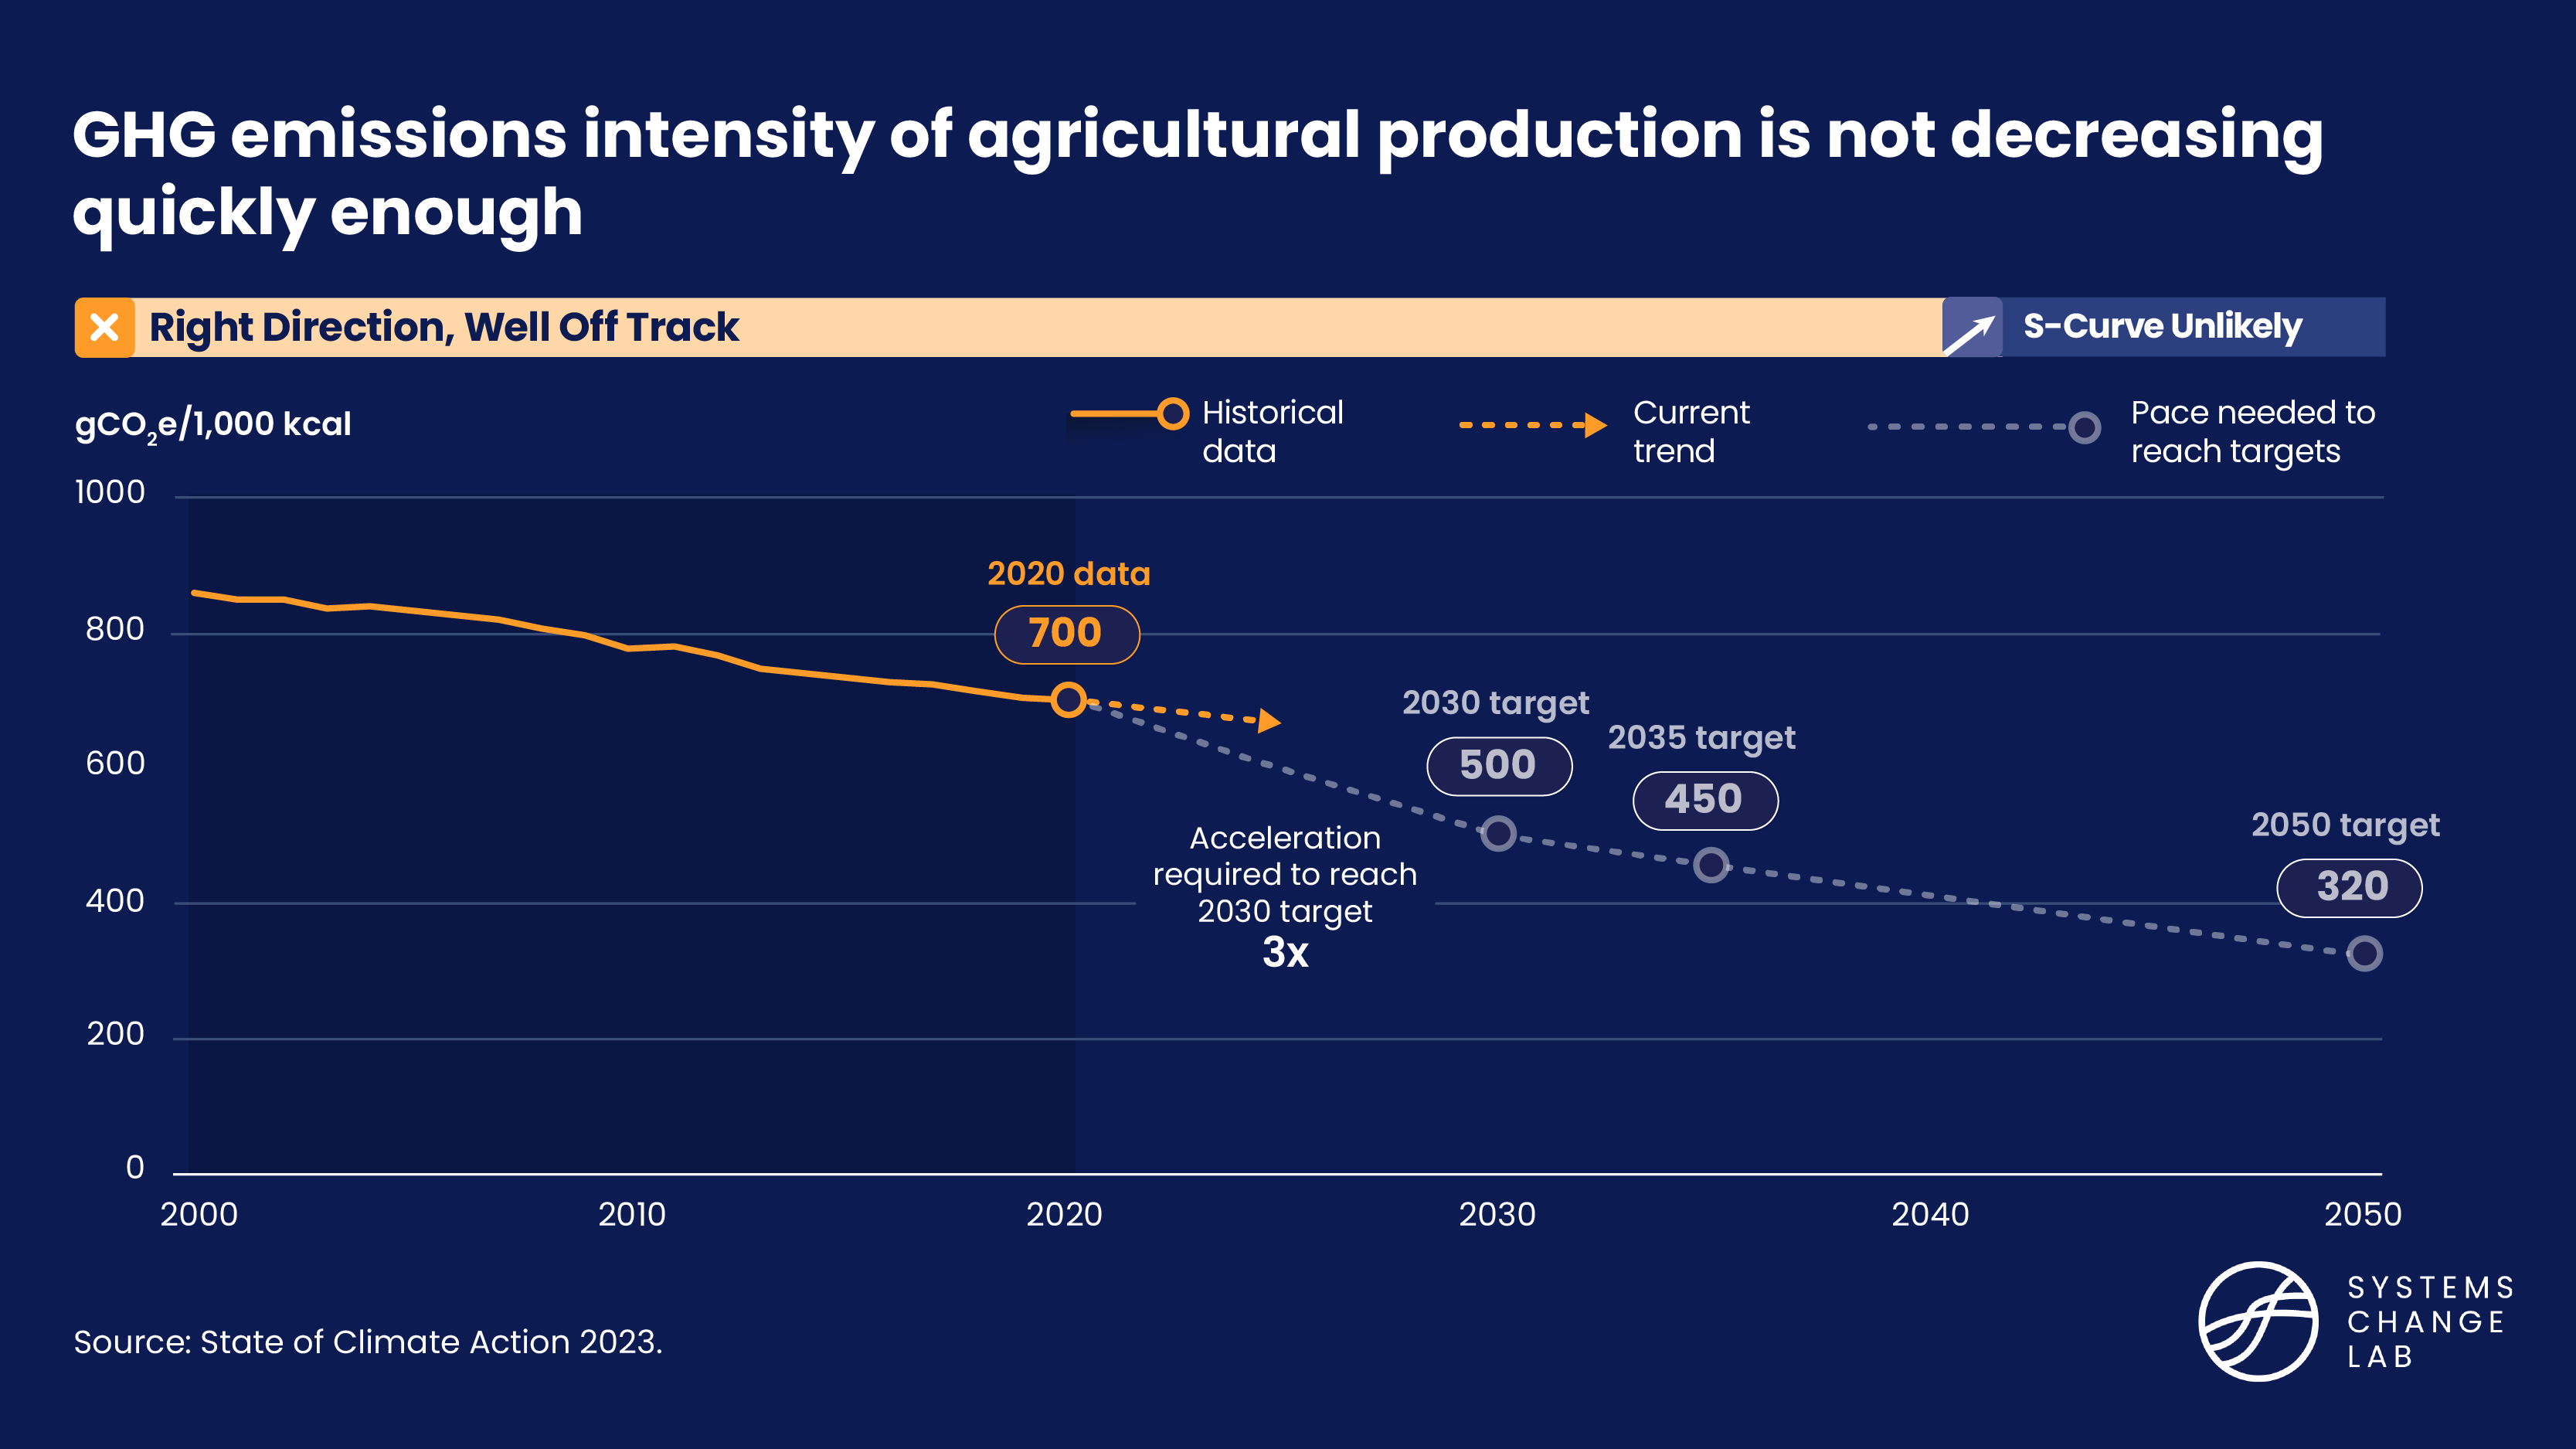 GHG emissions intensity of agricultural production is not decreasing quickly enough